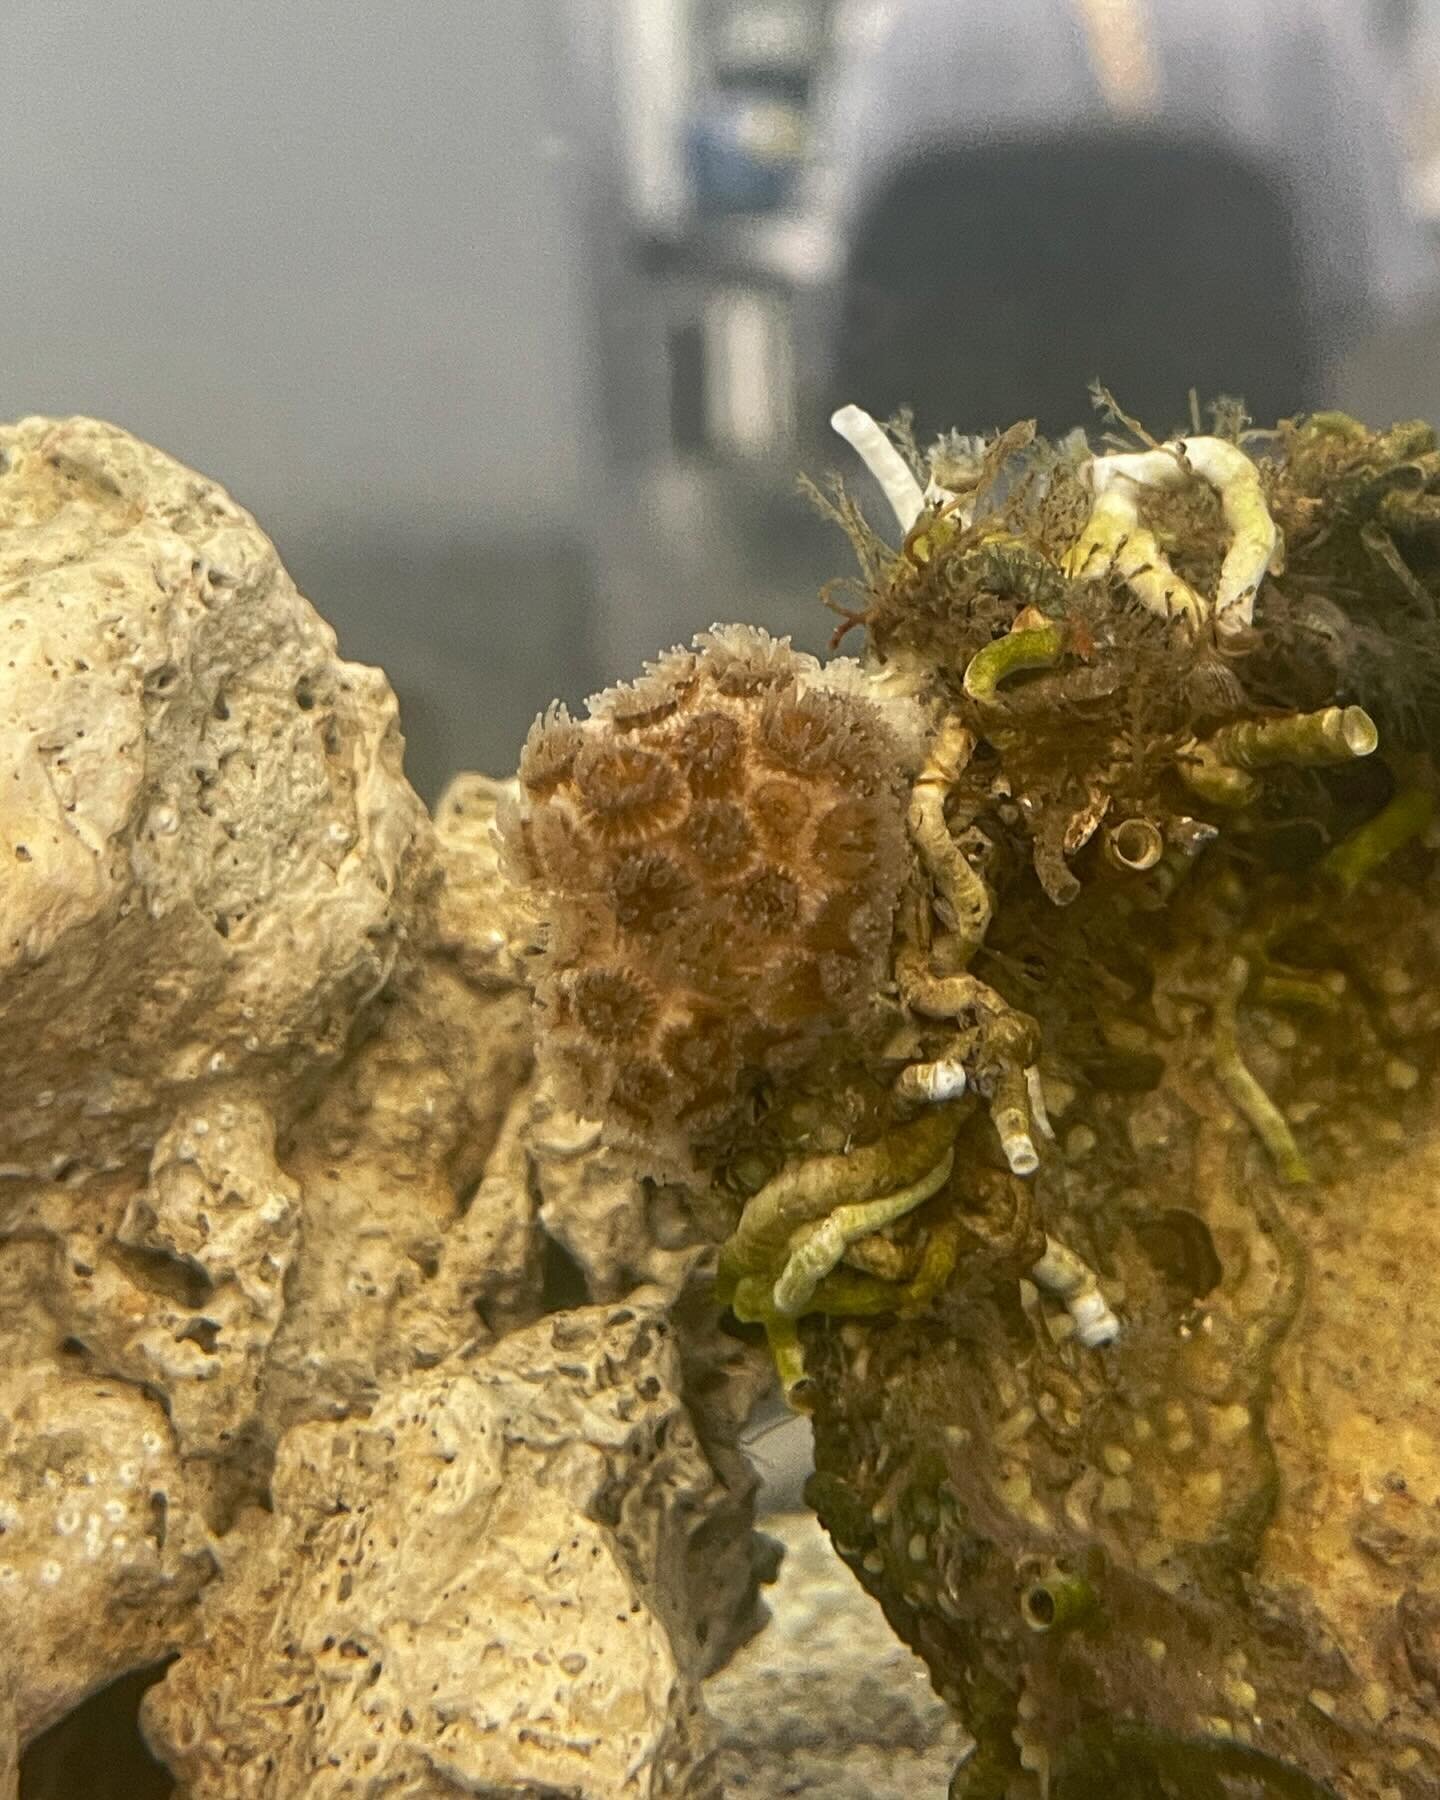 🤩 Welcome CiCi, Our New Resident of the Bahr Lab! 🤩

Hello everyone, we&rsquo;re thrilled to introduce CiCi, the newest member of the Bahr Lab family! 🎉 CiCi is a breathtaking species of Astrangia coral (Astrangia sp.) discovered during a recent b